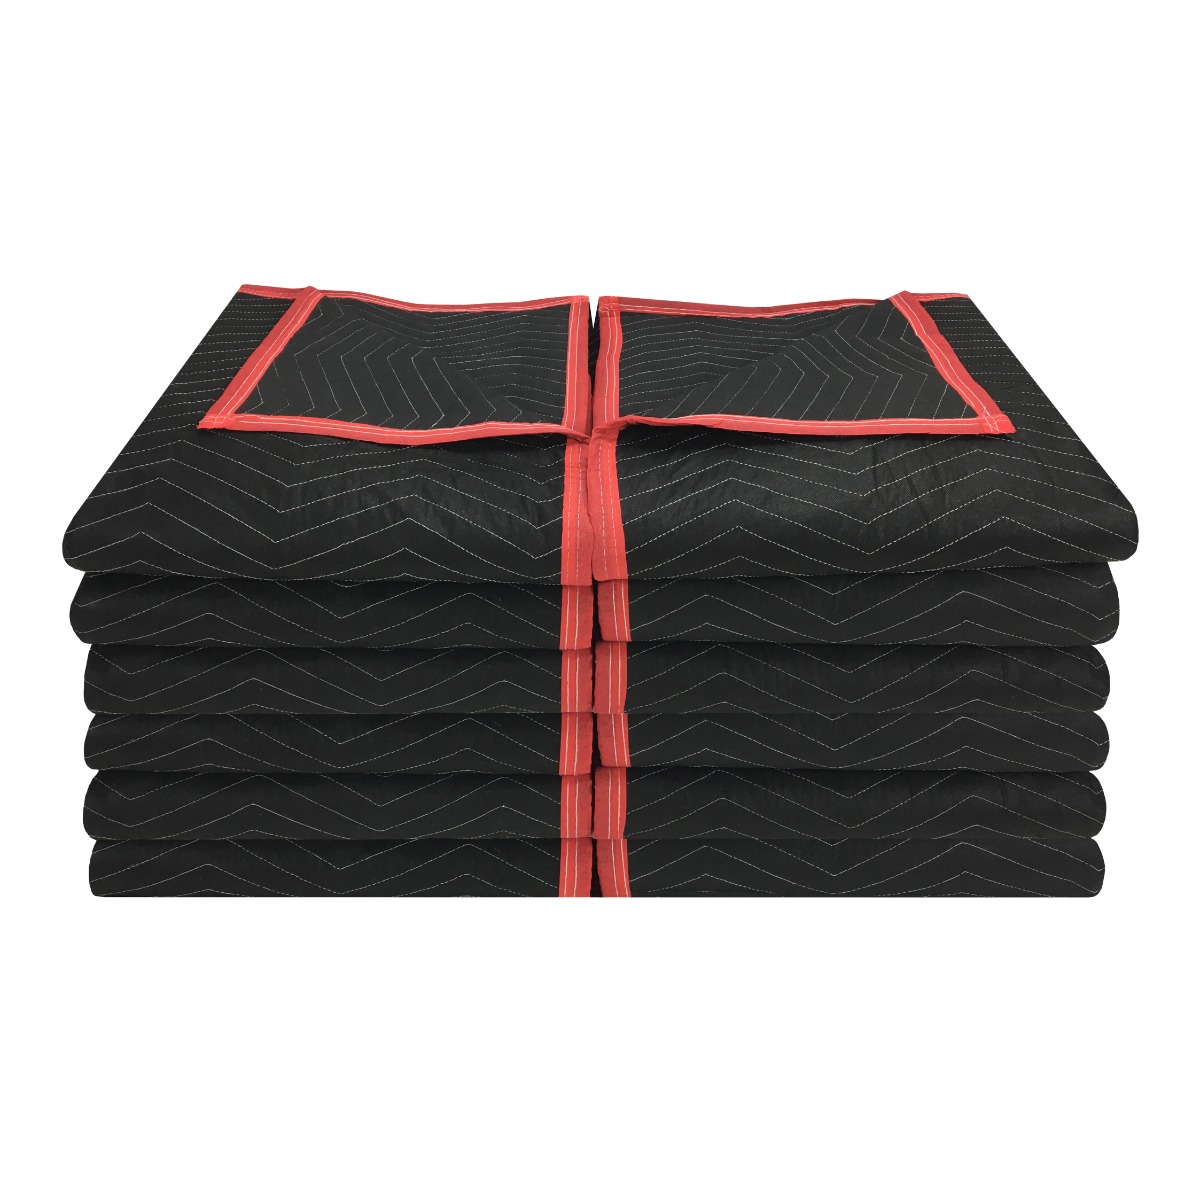 UBmove™ 12 Pack of Deluxe Moving Blankets - 5.42lbs/each - Protective Shipping